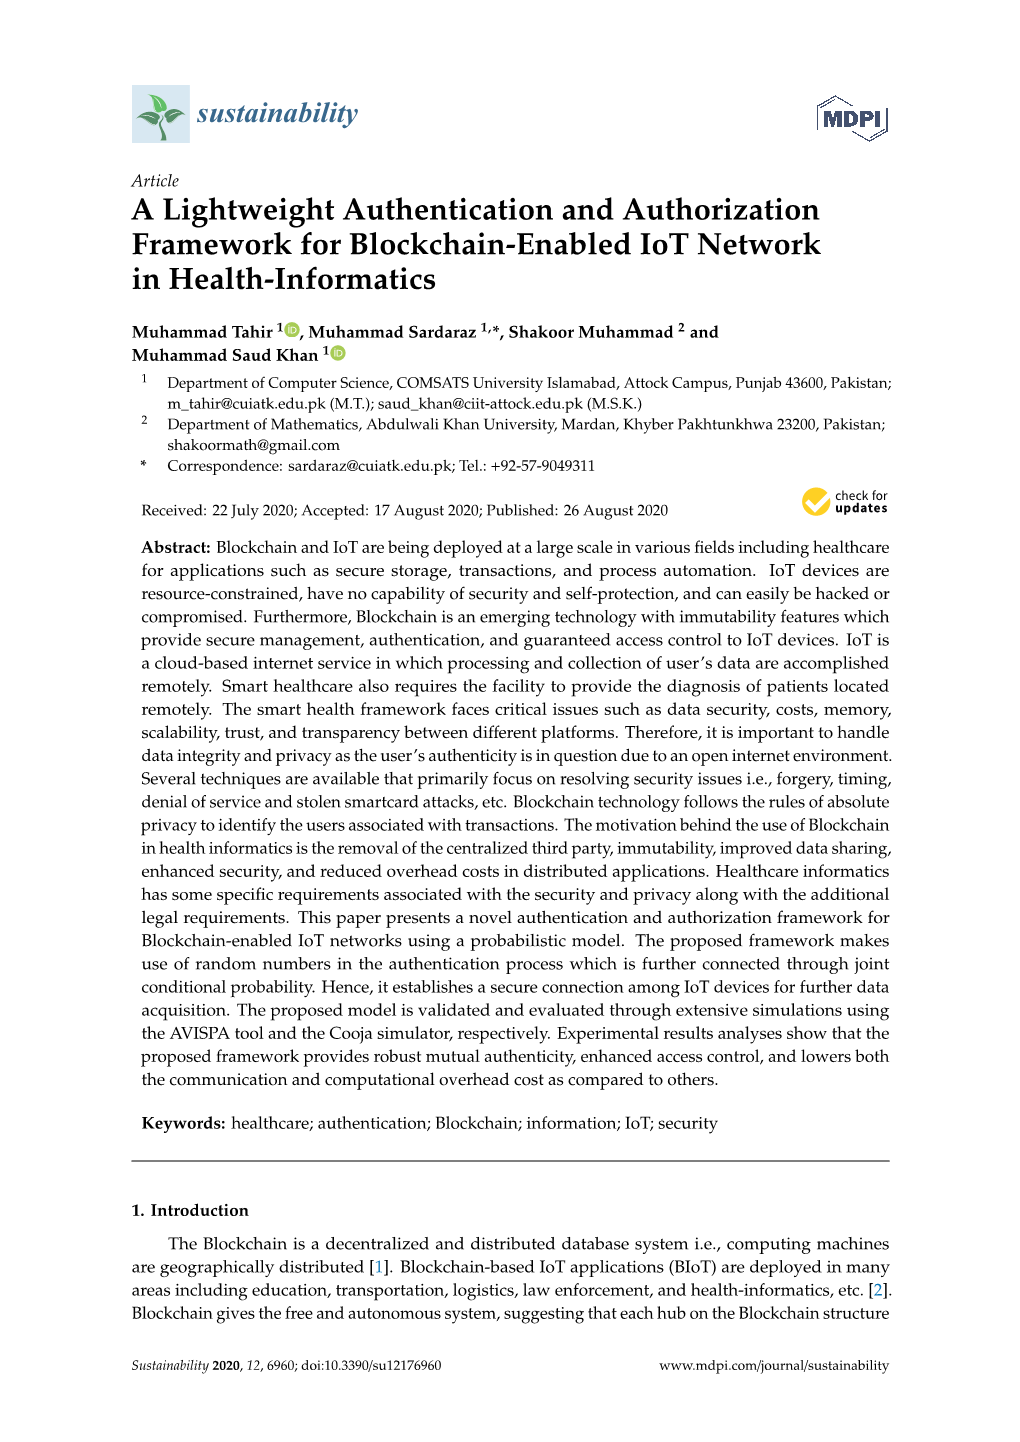 A Lightweight Authentication and Authorization Framework for Blockchain-Enabled Iot Network in Health-Informatics